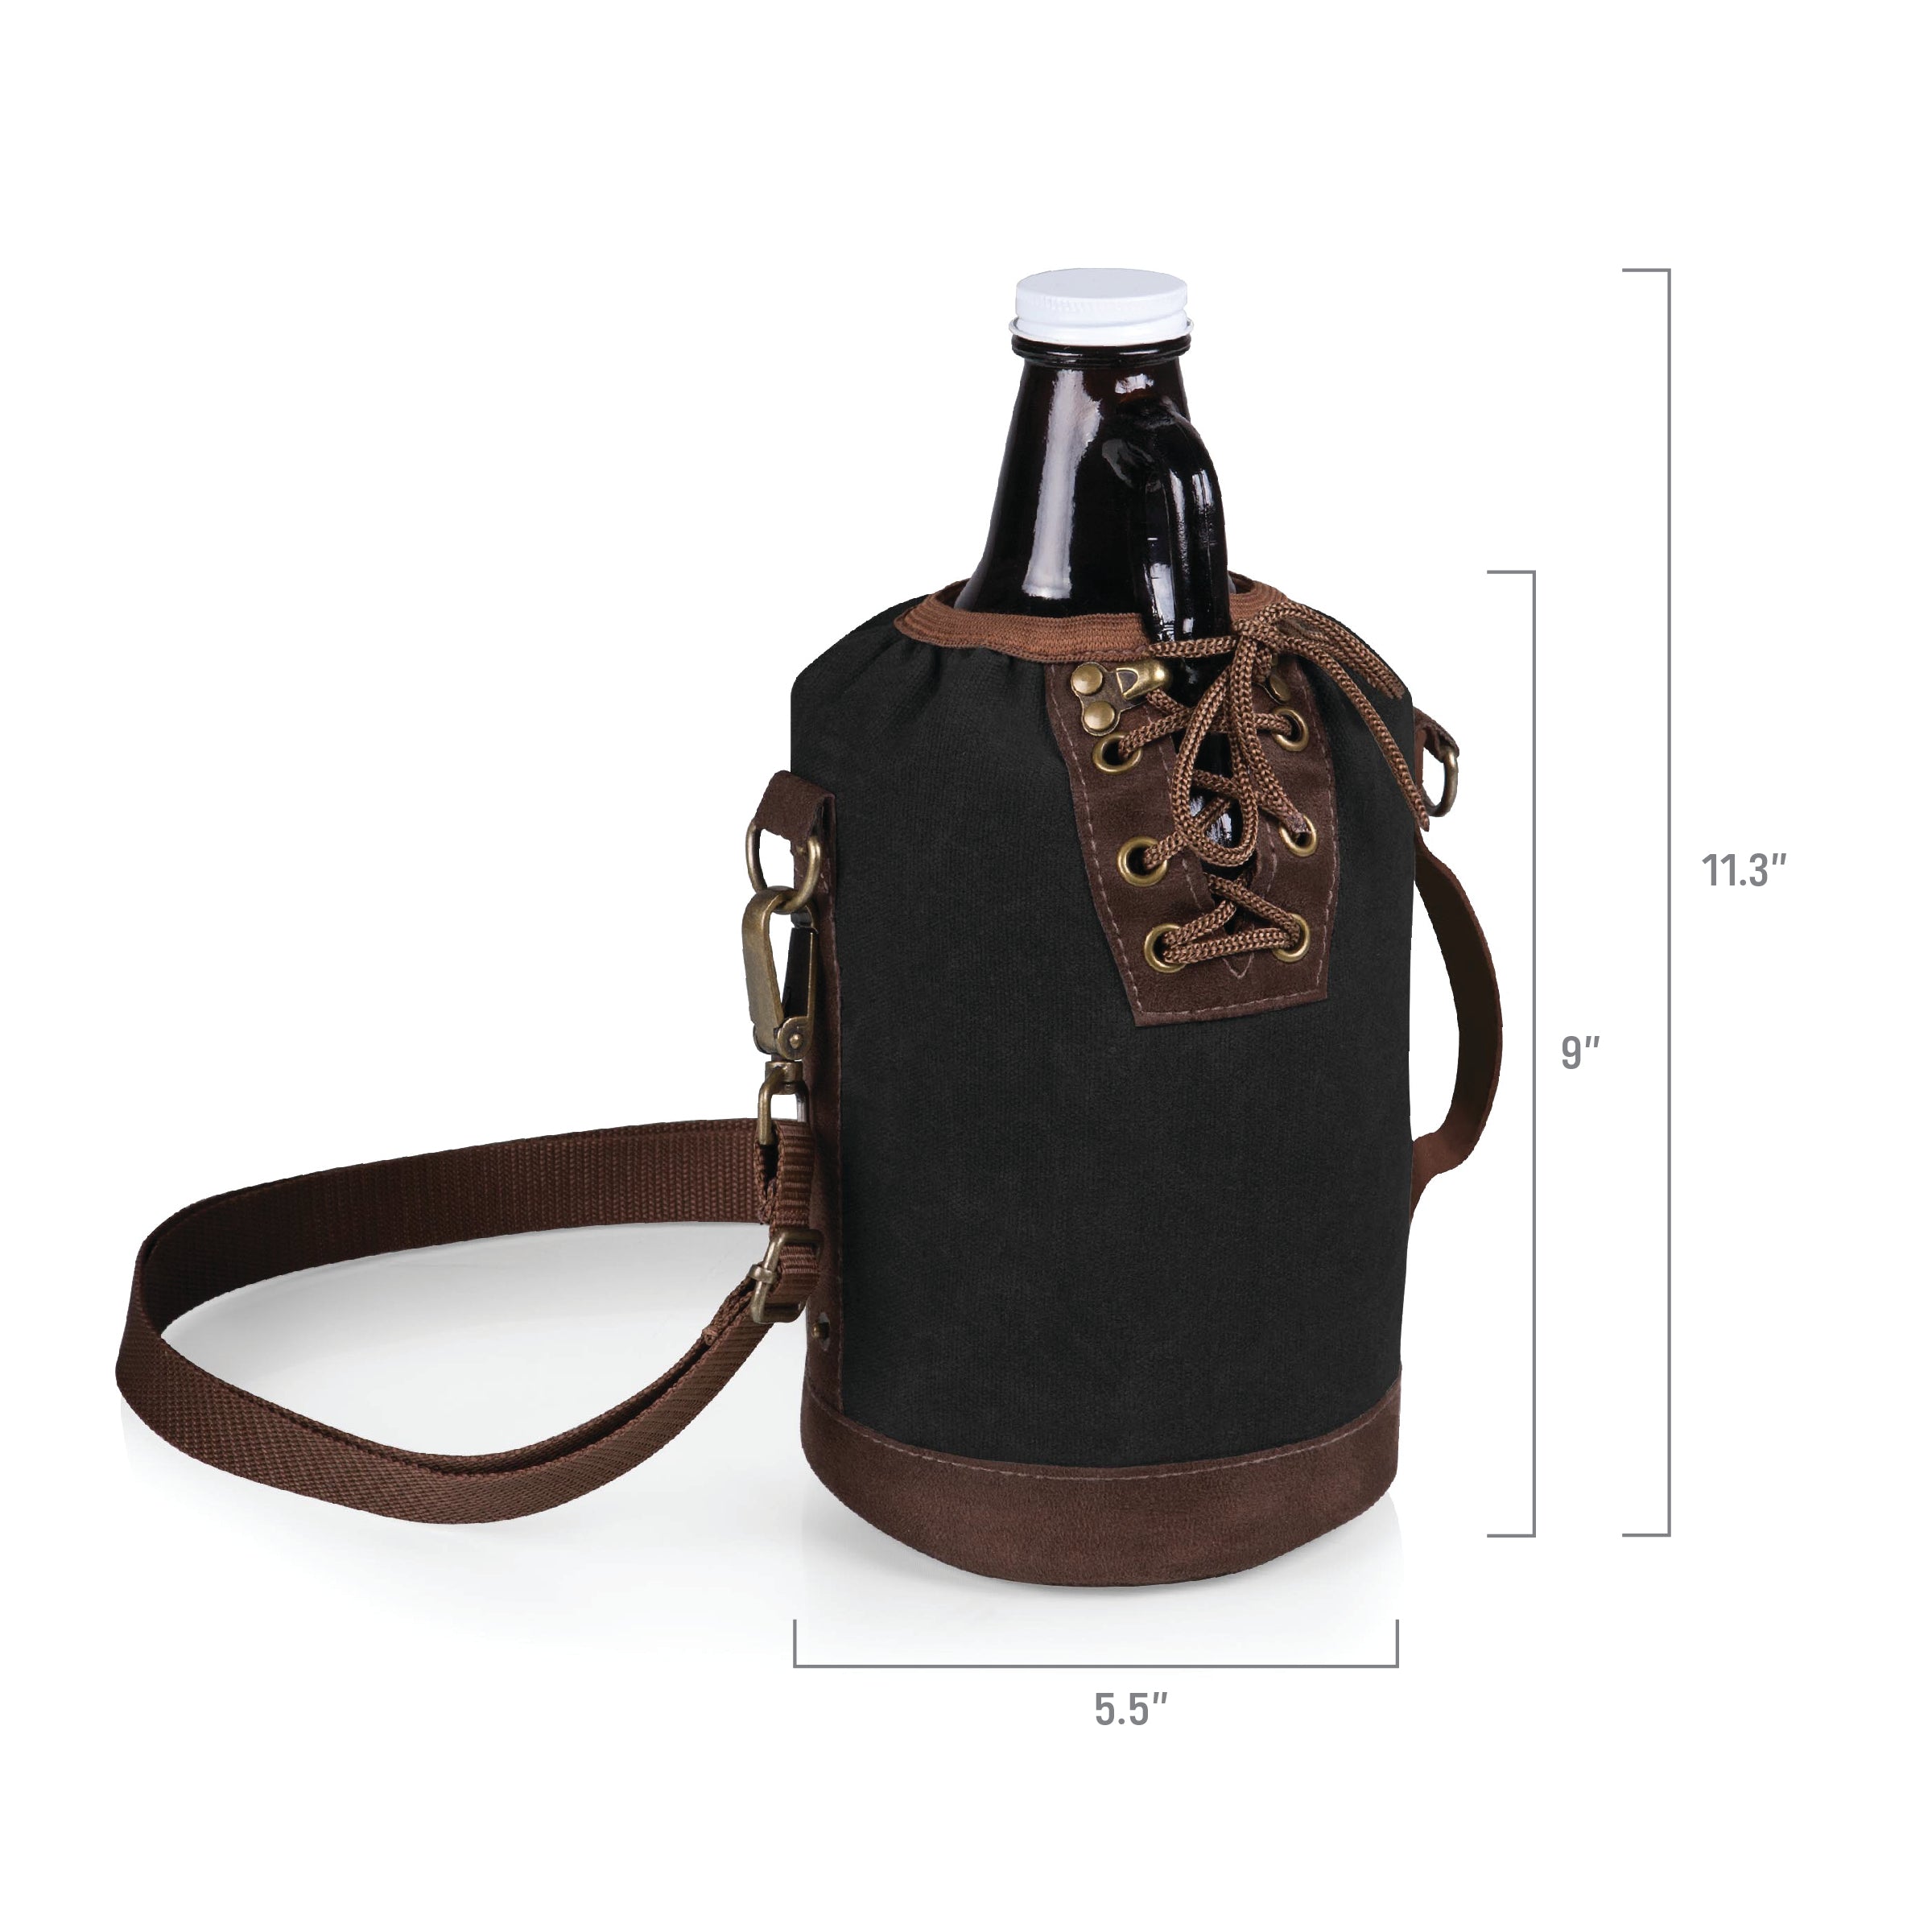 Seattle Kraken - Insulated Growler Tote with 64 oz. Glass Growler